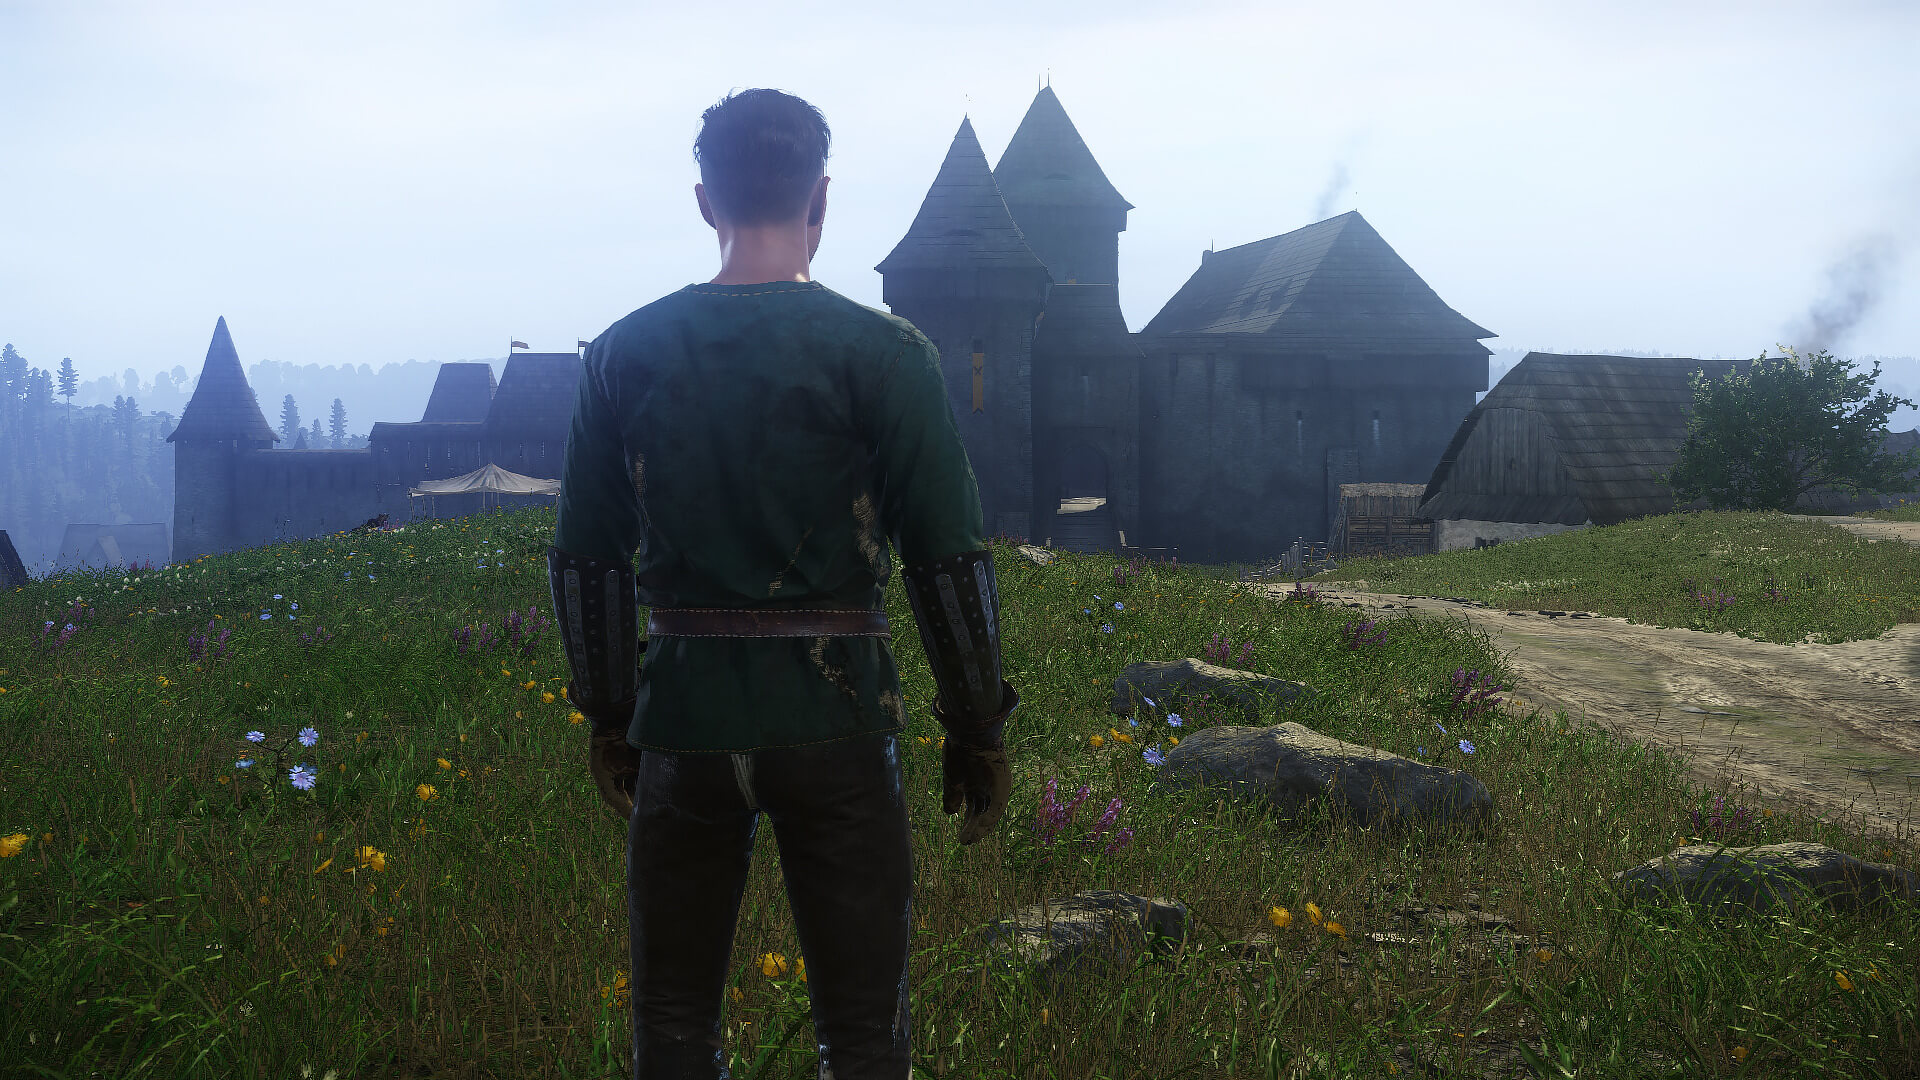 More Visible Dice at Kingdom Come: Deliverance Nexus - Mods and community